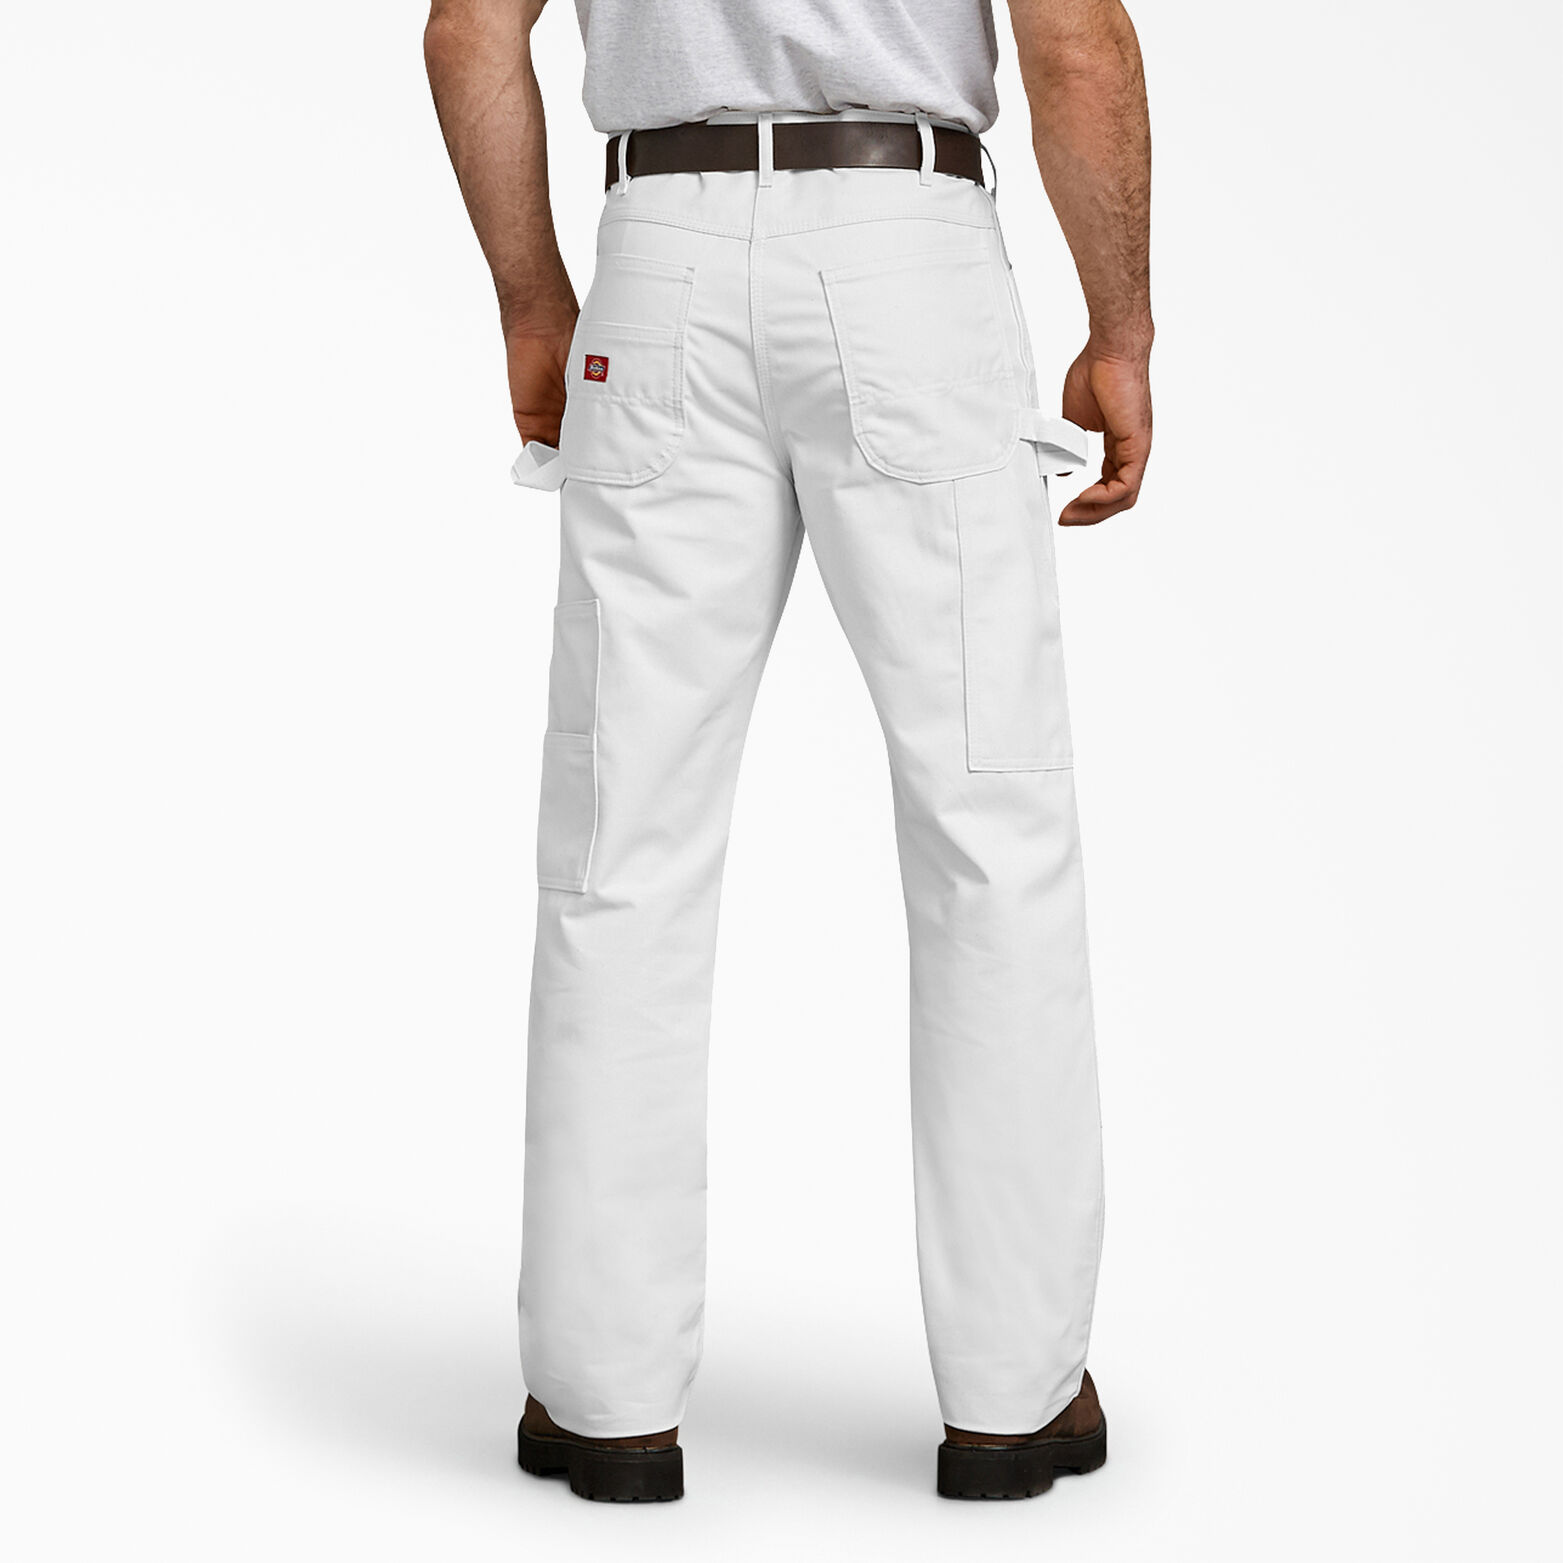 Jeans for Men Double Knee | Dickies